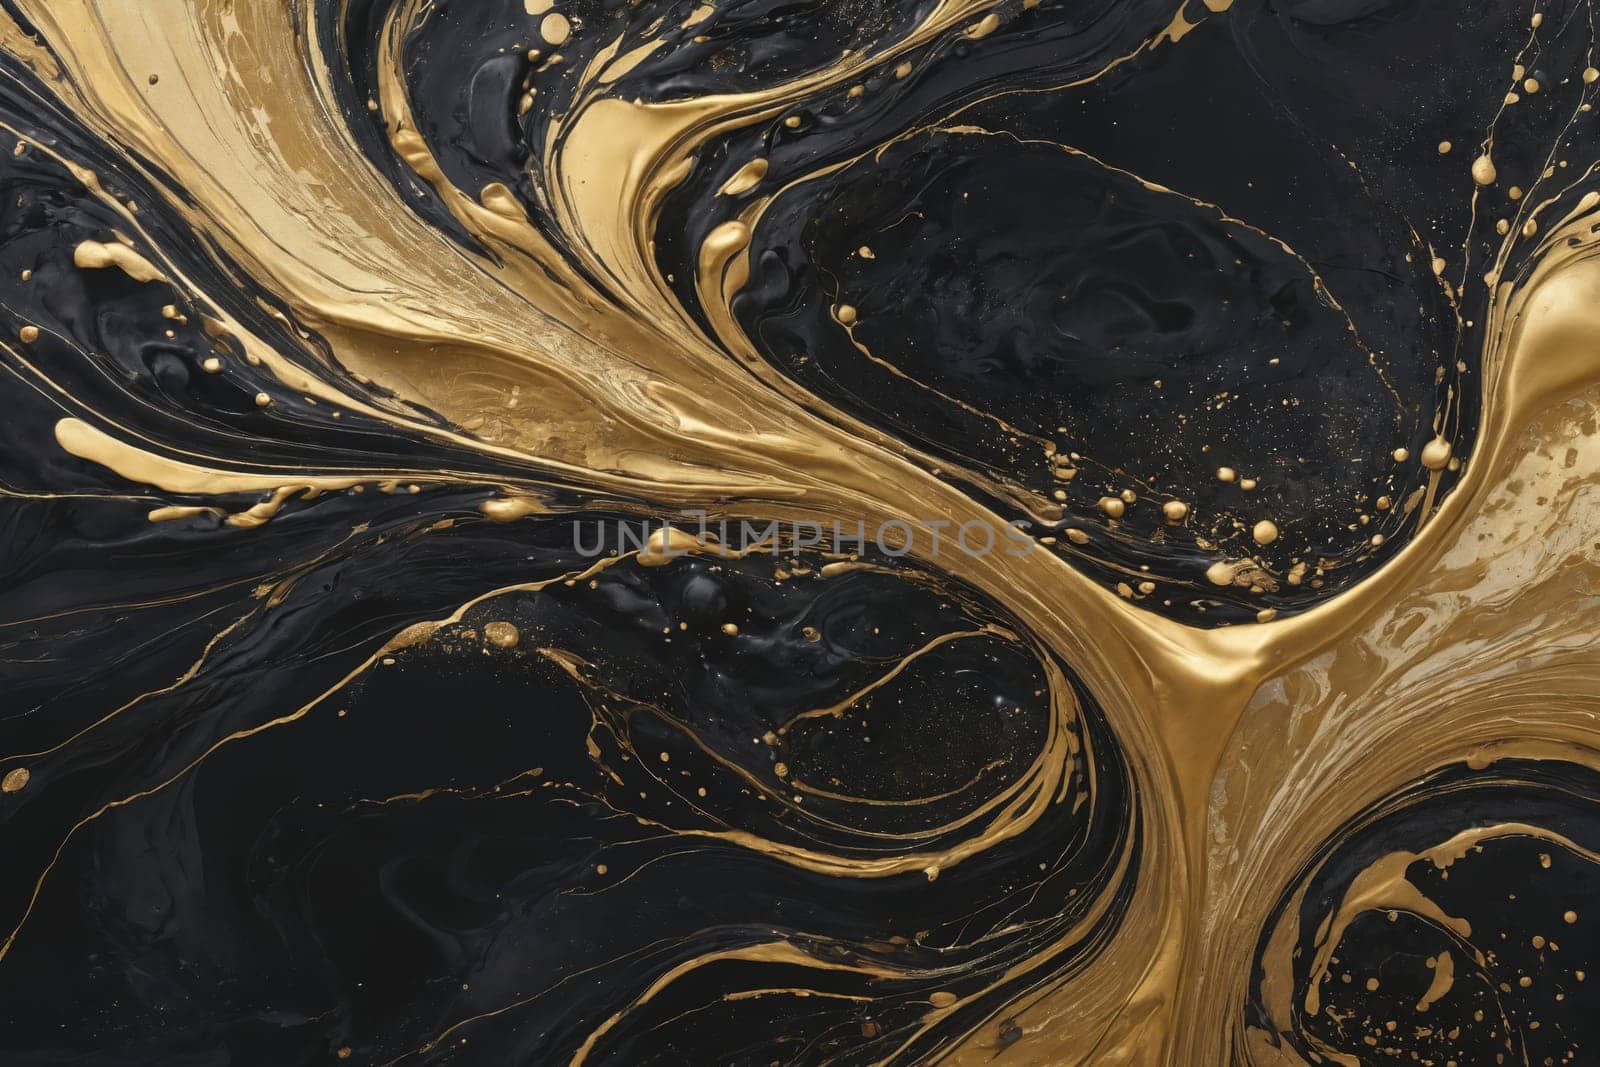 The dynamic movement of gold swirls creates an abstract and elegant visual experience.